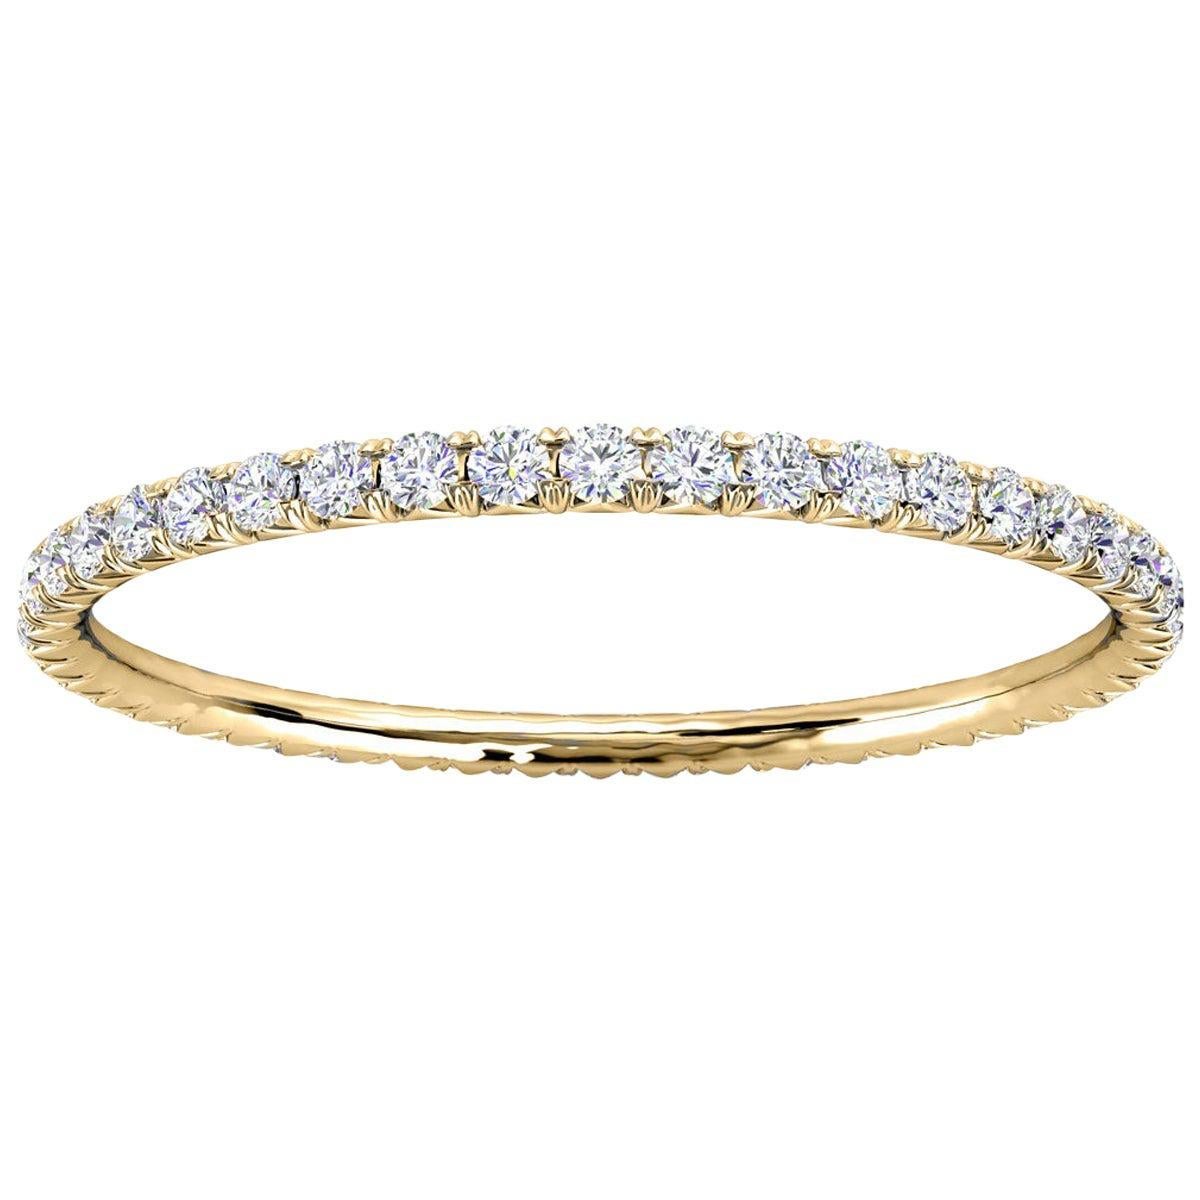 For Sale:  14K Yellow Gold Mia Petite French Pave Diamond Eternity Ring '1/4 Ct. Tw'